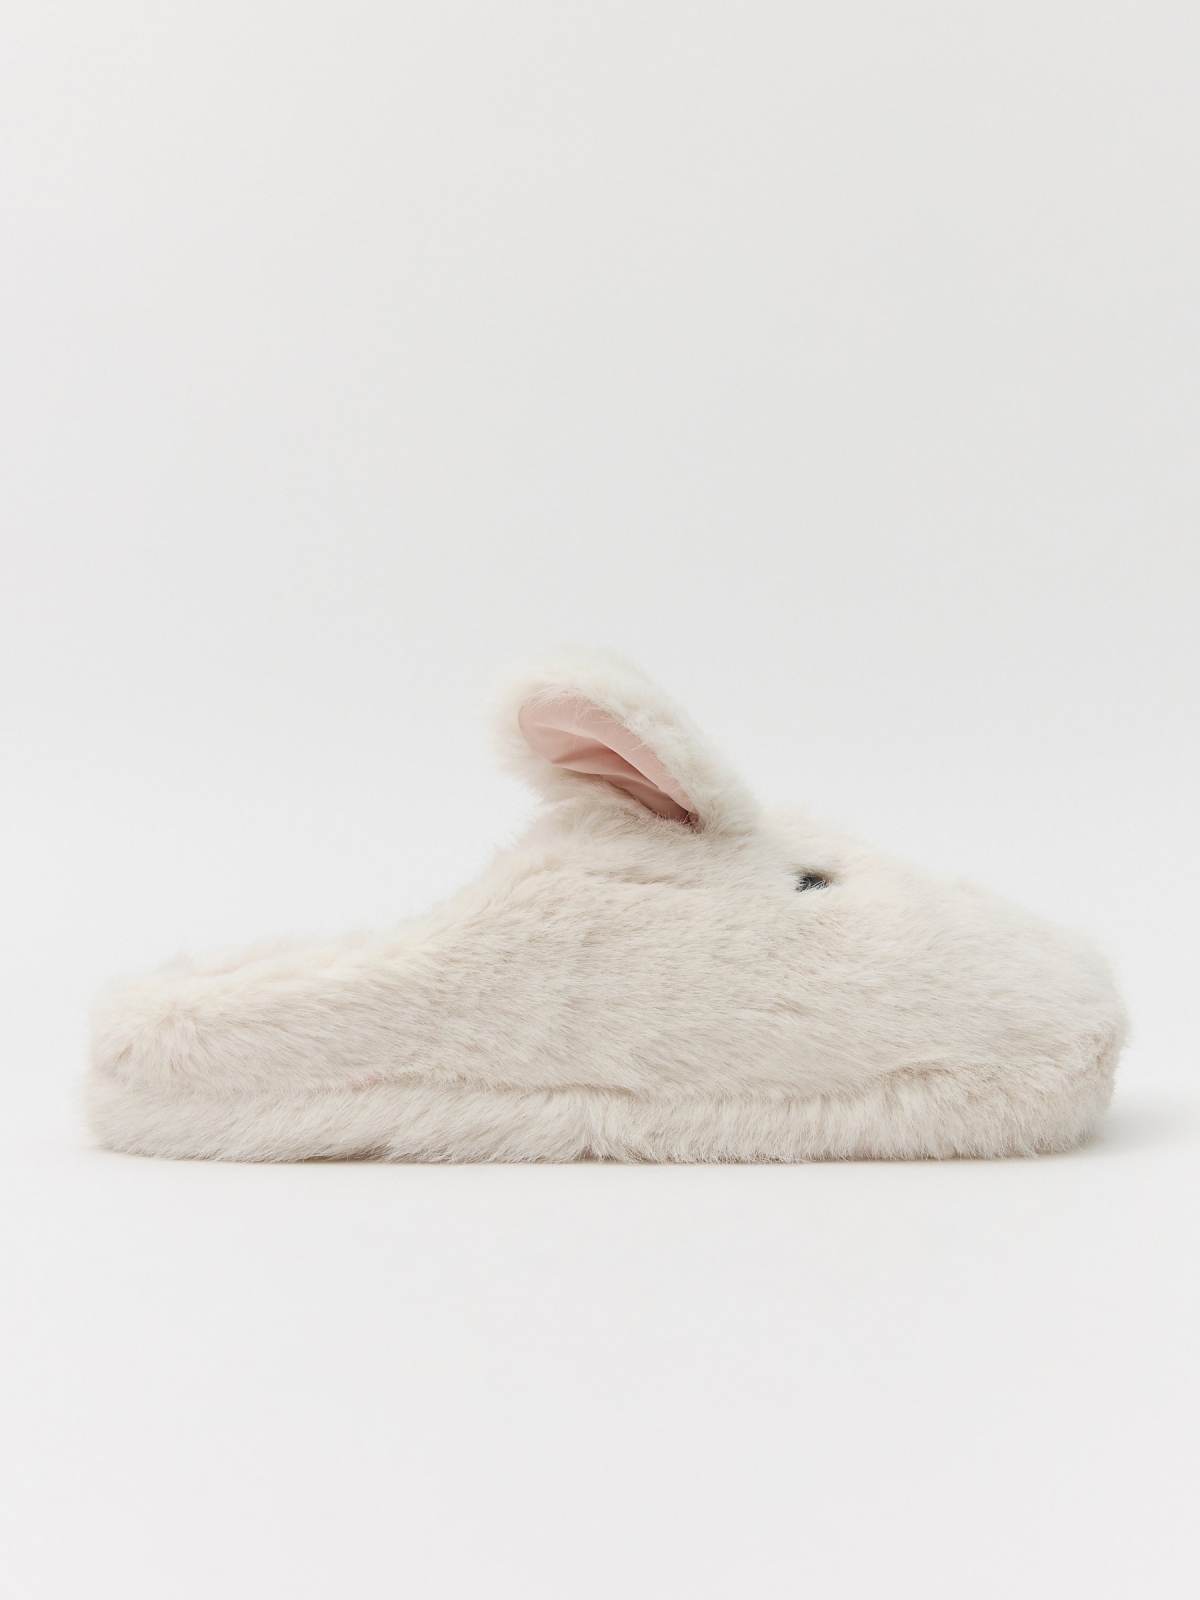 House slippers rabbit ears off white front view